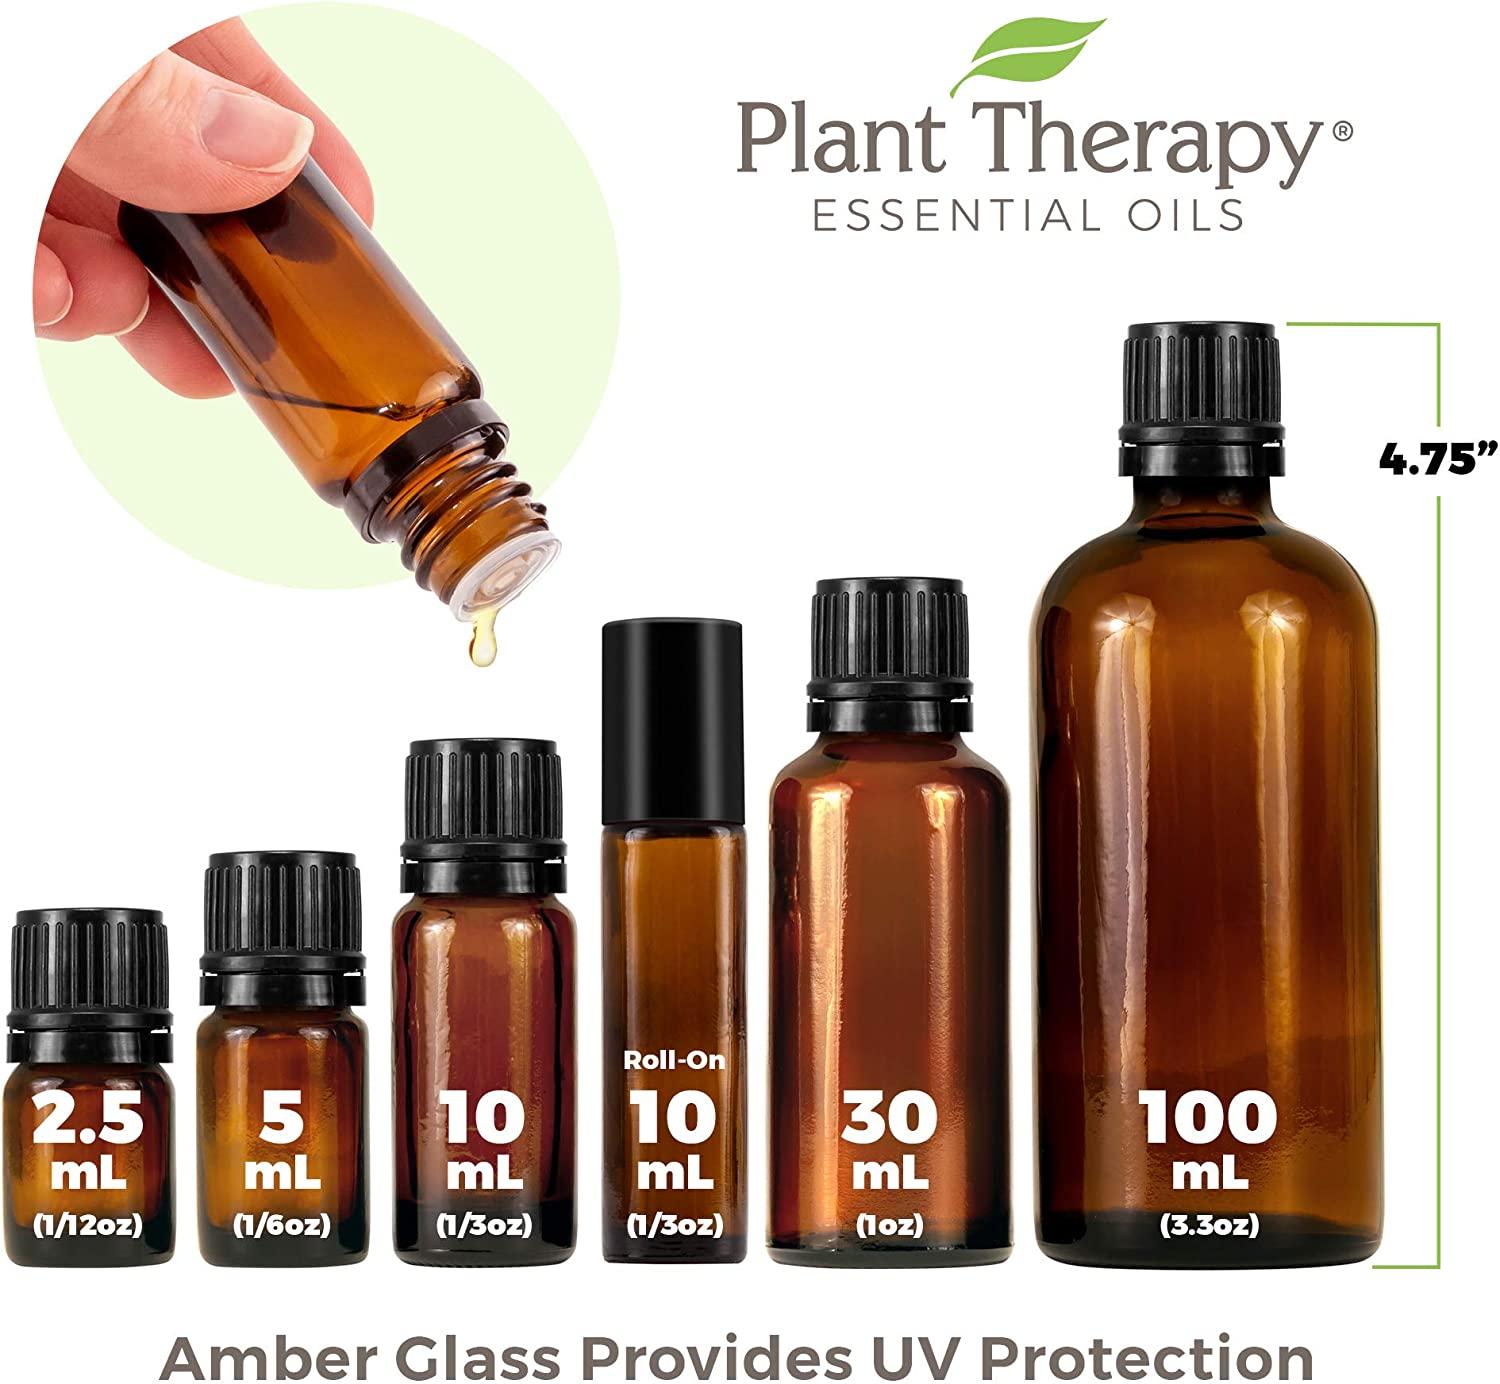 Plant Therapy Lime in The Coconut Essential Oil Blend 10 mL (1/3